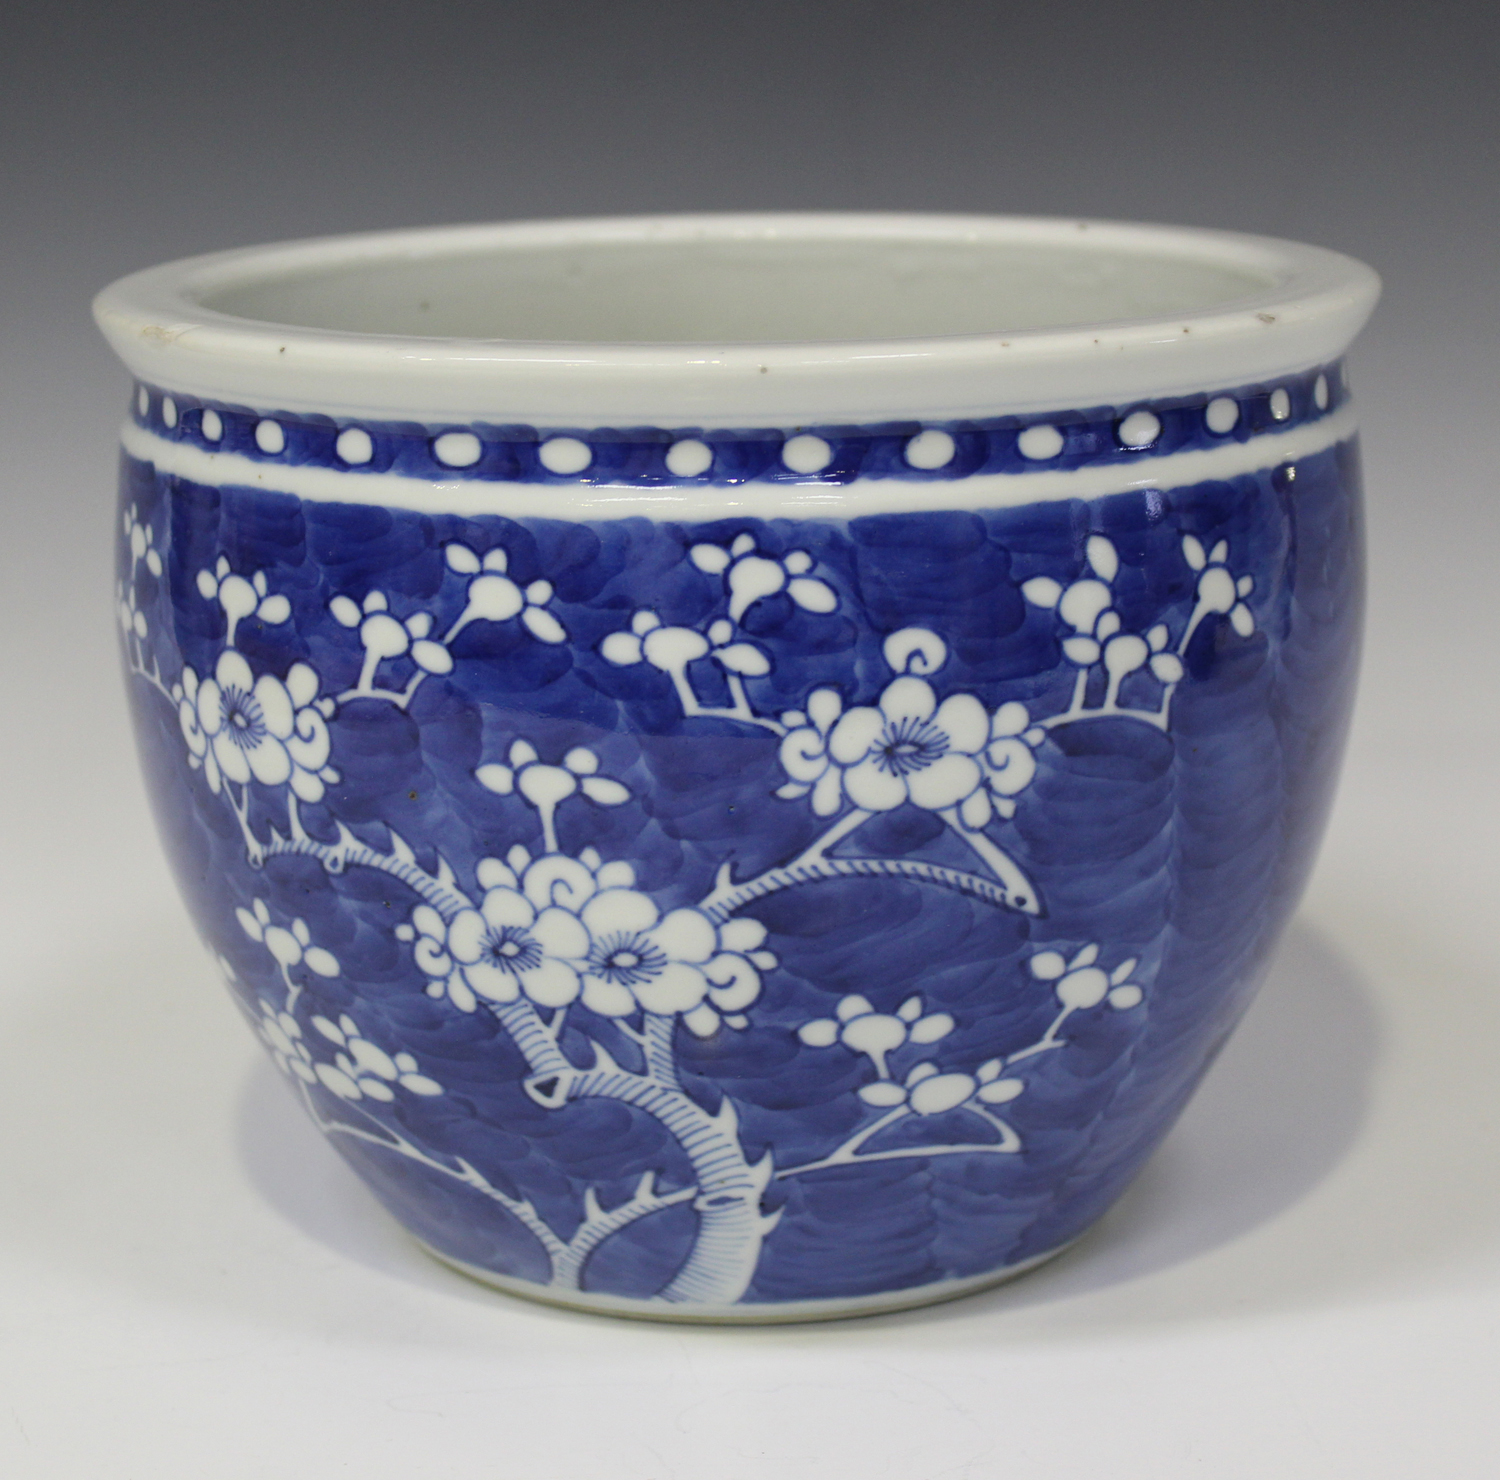 A Chinese blue and white porcelain jardinière, late 19th century, of